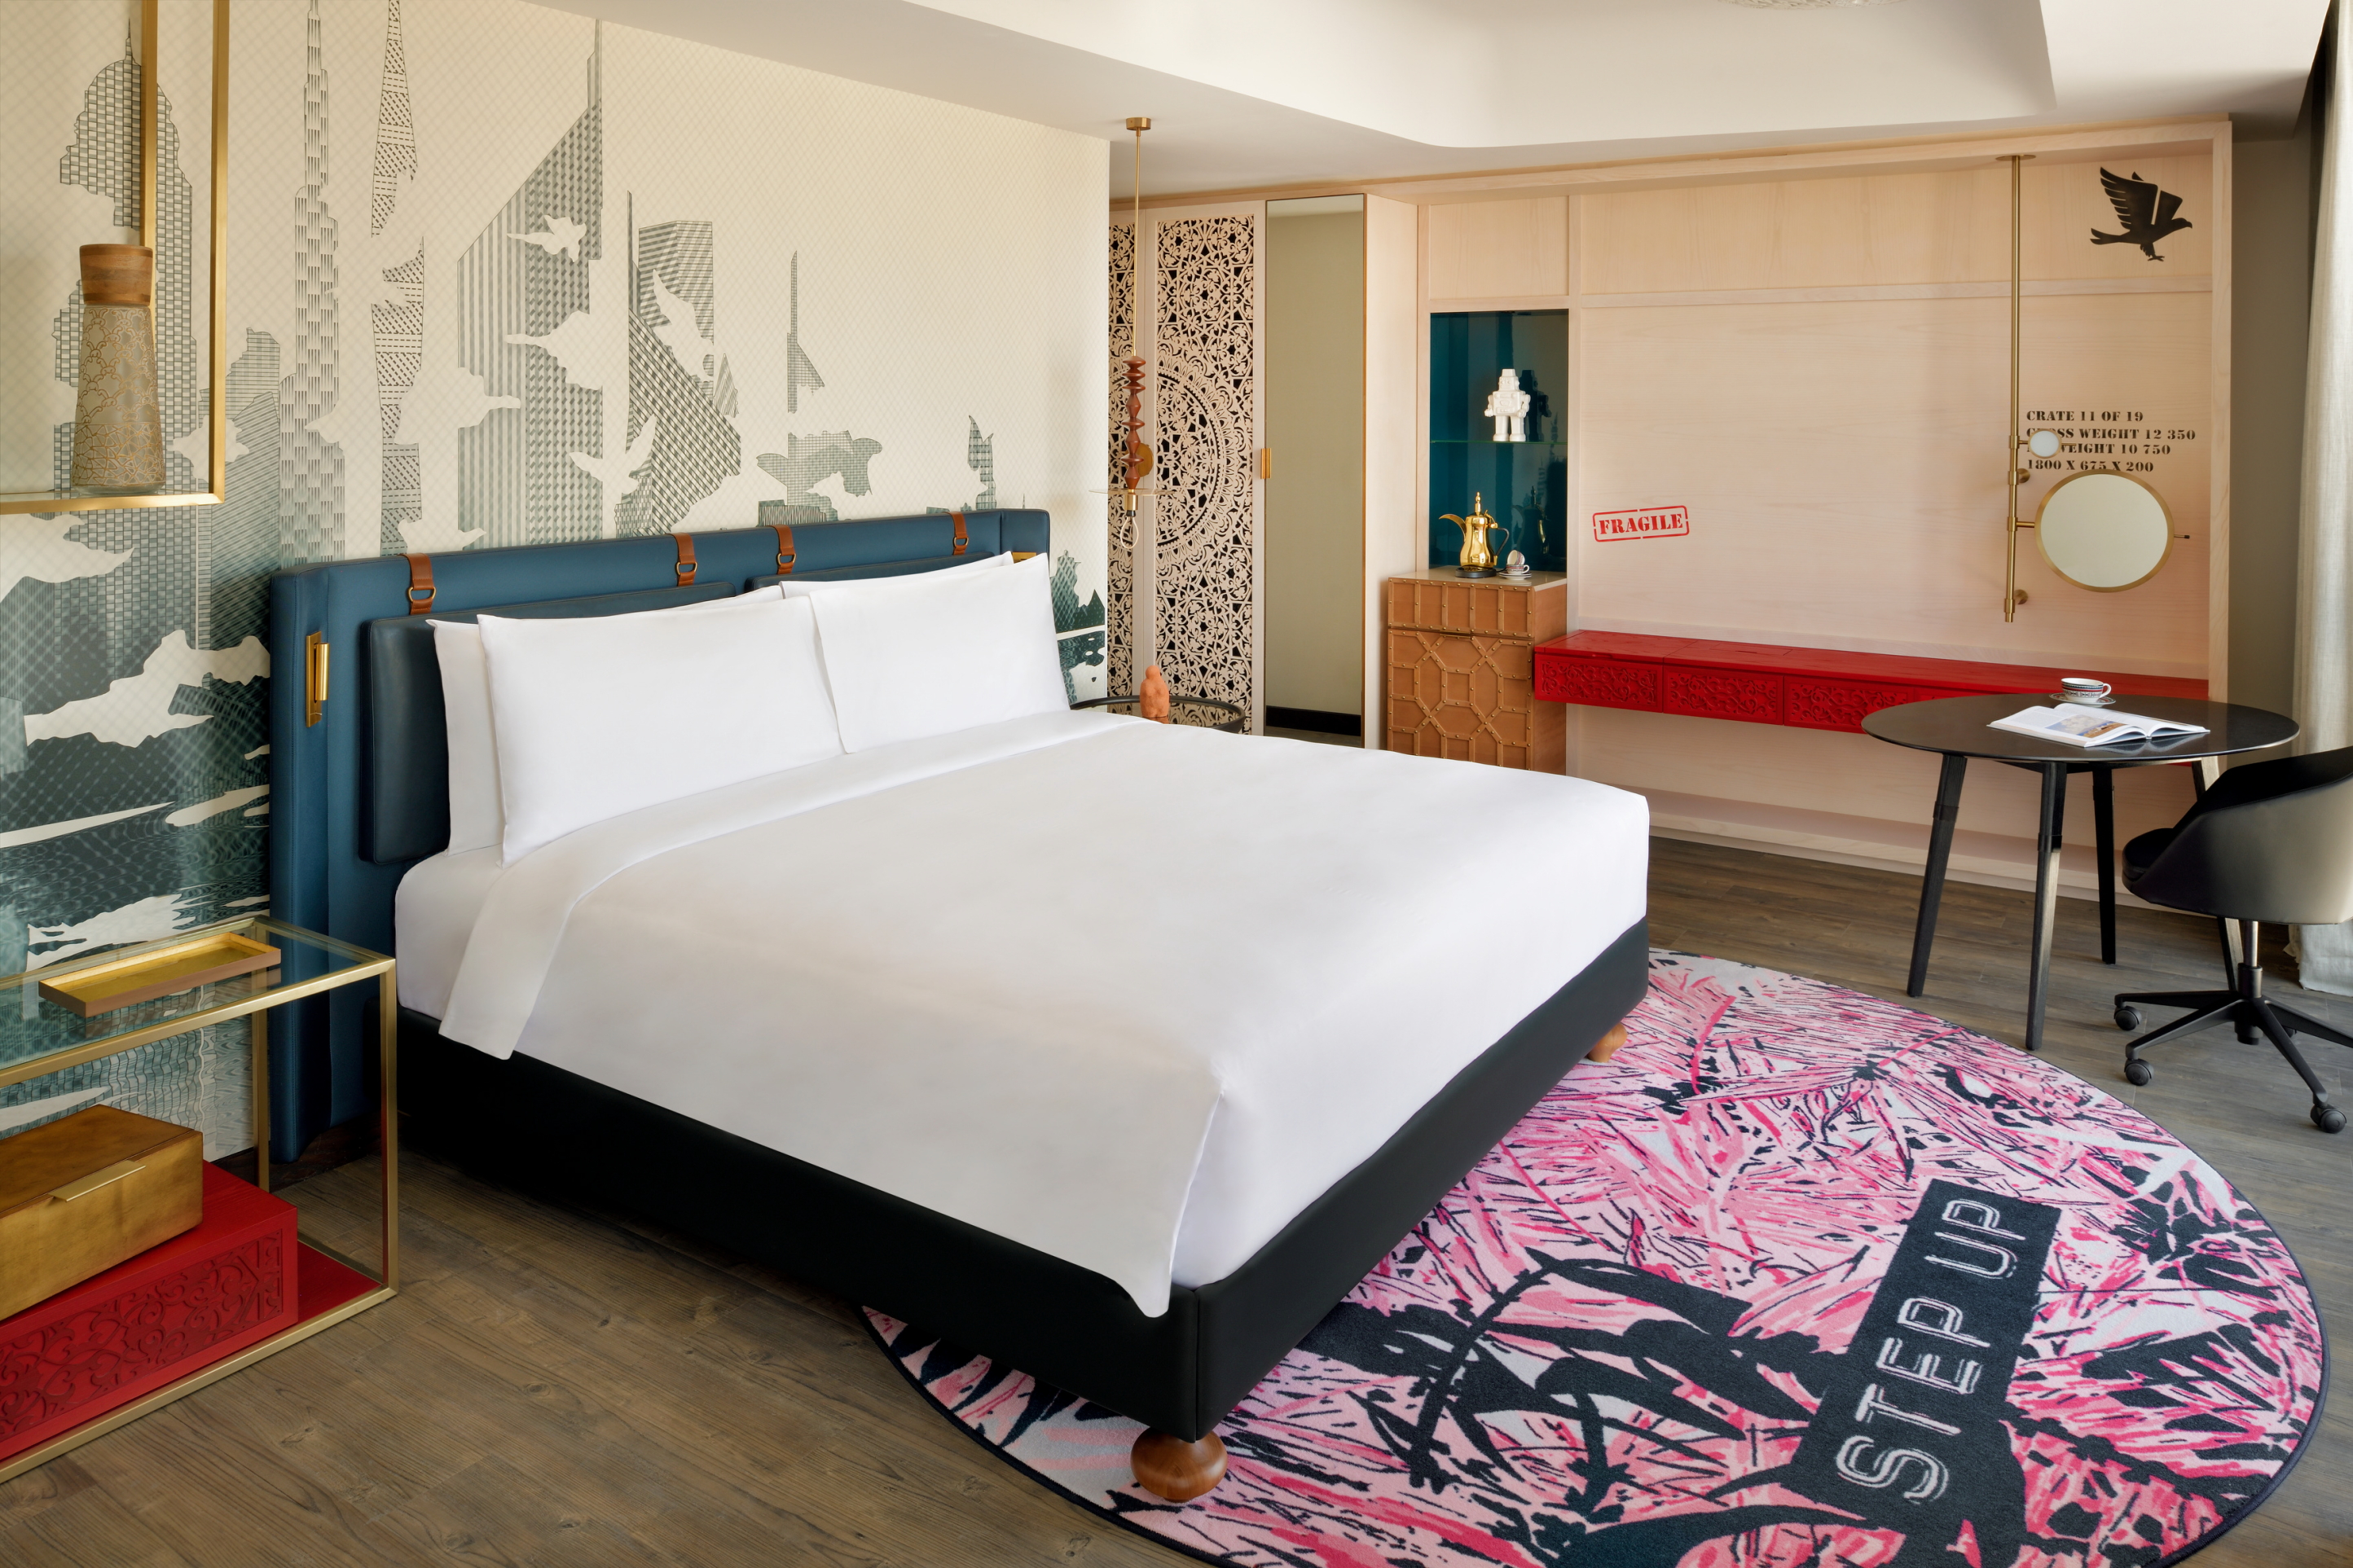 Each floor of the 269-room Hotel Indigo Dubai Downtown is dedicated to one artist, giving guests an opportunity to enjoy a variety of art on the way to their rooms. Click to enlarge.